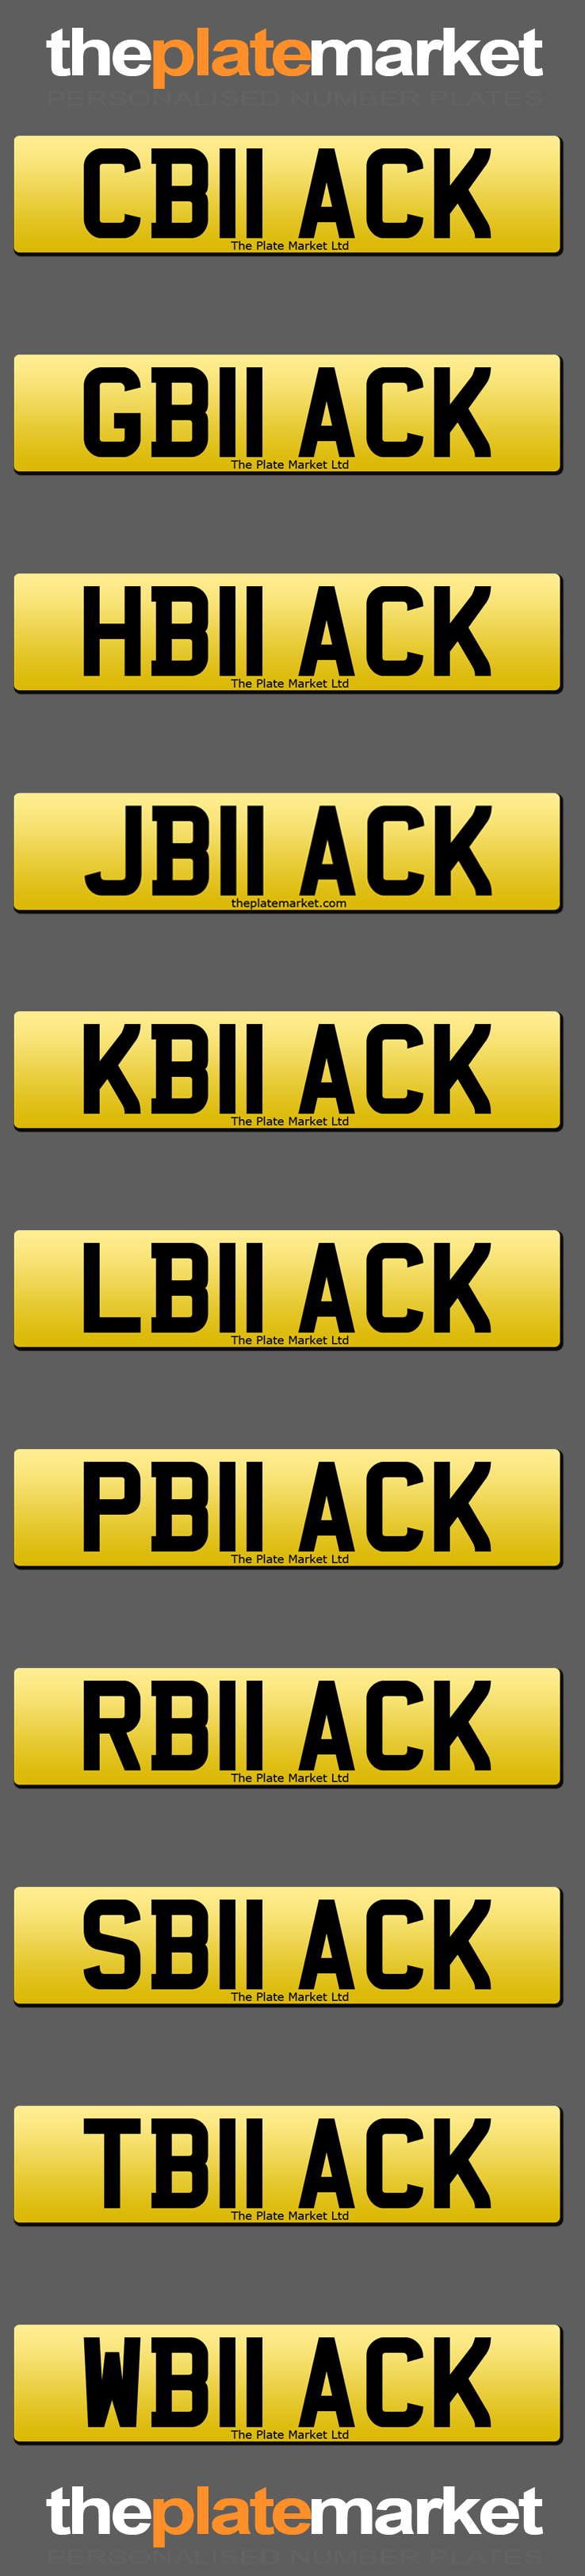 surname Black private number plate ideas